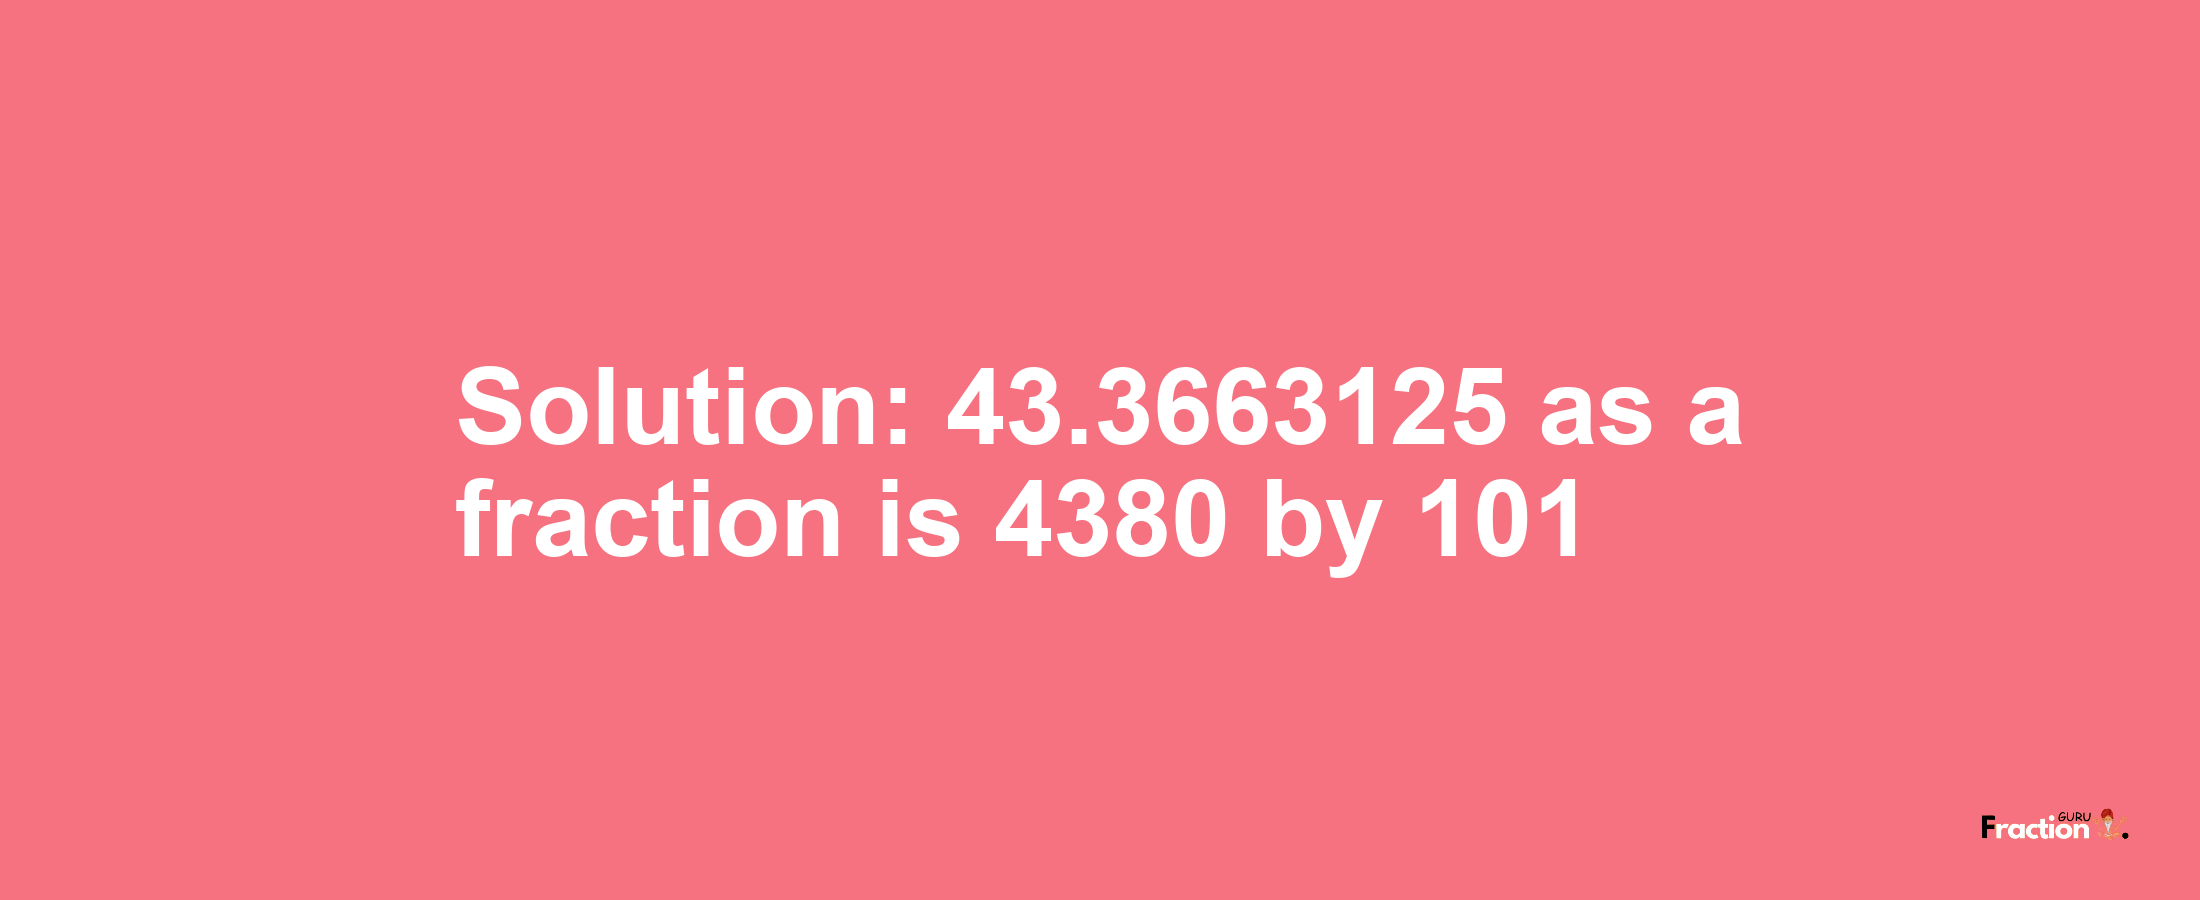 Solution:43.3663125 as a fraction is 4380/101